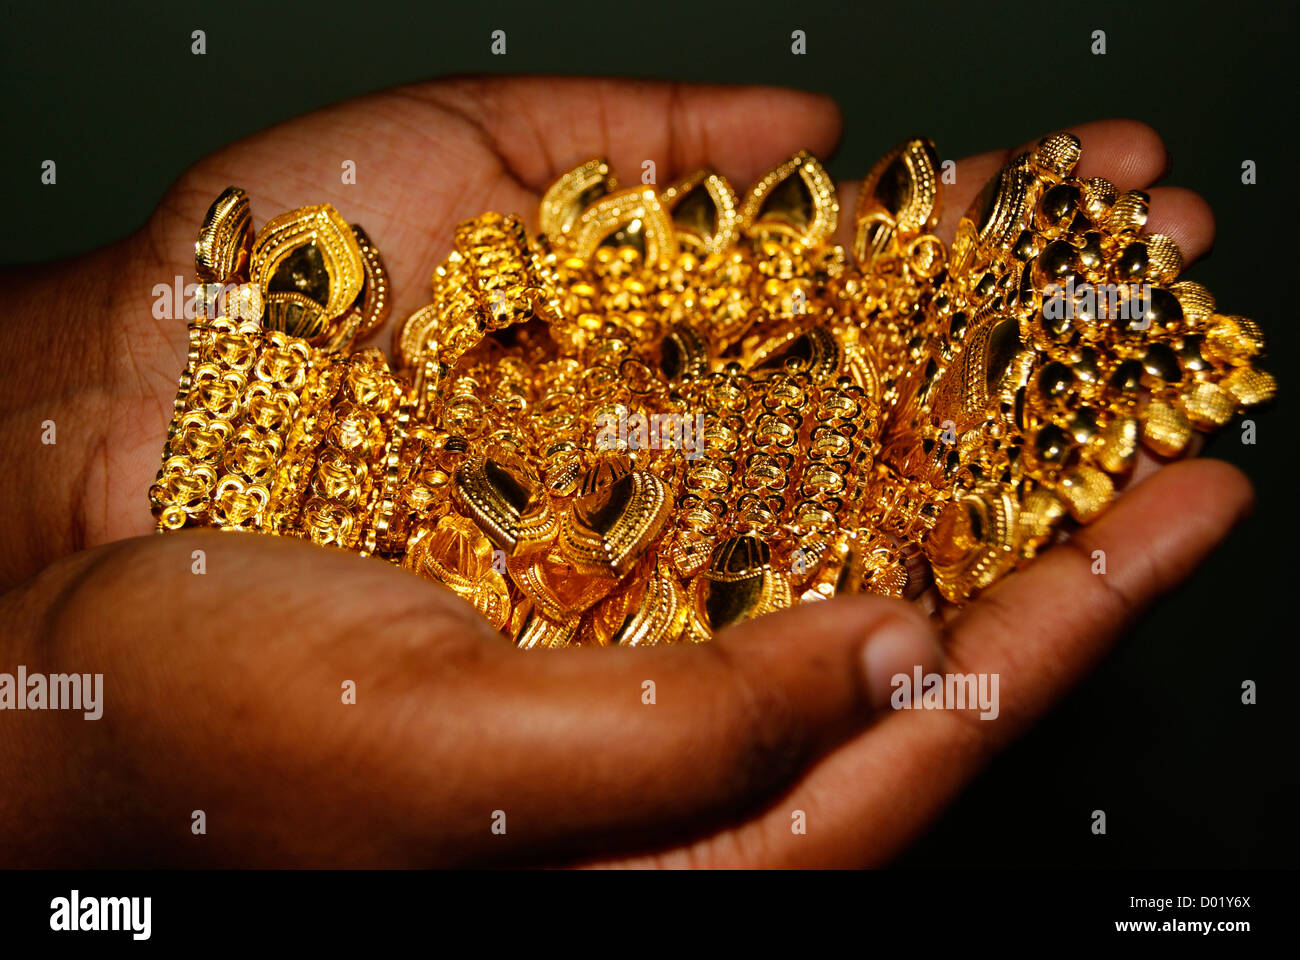 Young Girl Holding Gold Necklace Jewellery Ornaments on Hands Closeup Black Cutout view Stock Photo